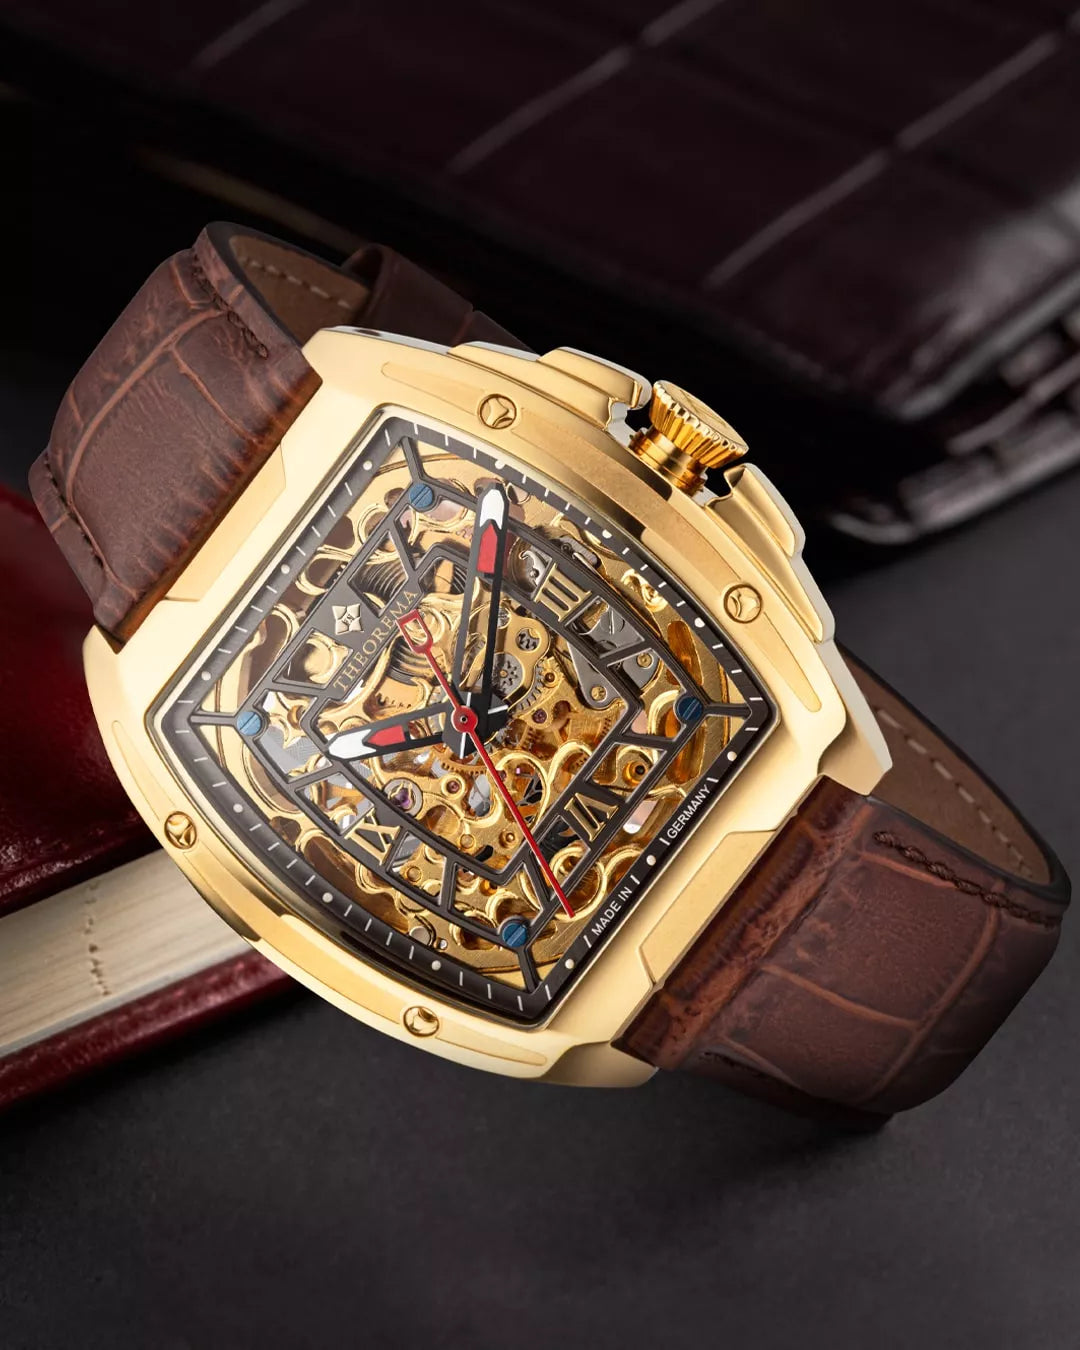 The epitome of mastery. An automatic see-through skeleton with the perfect attitude.